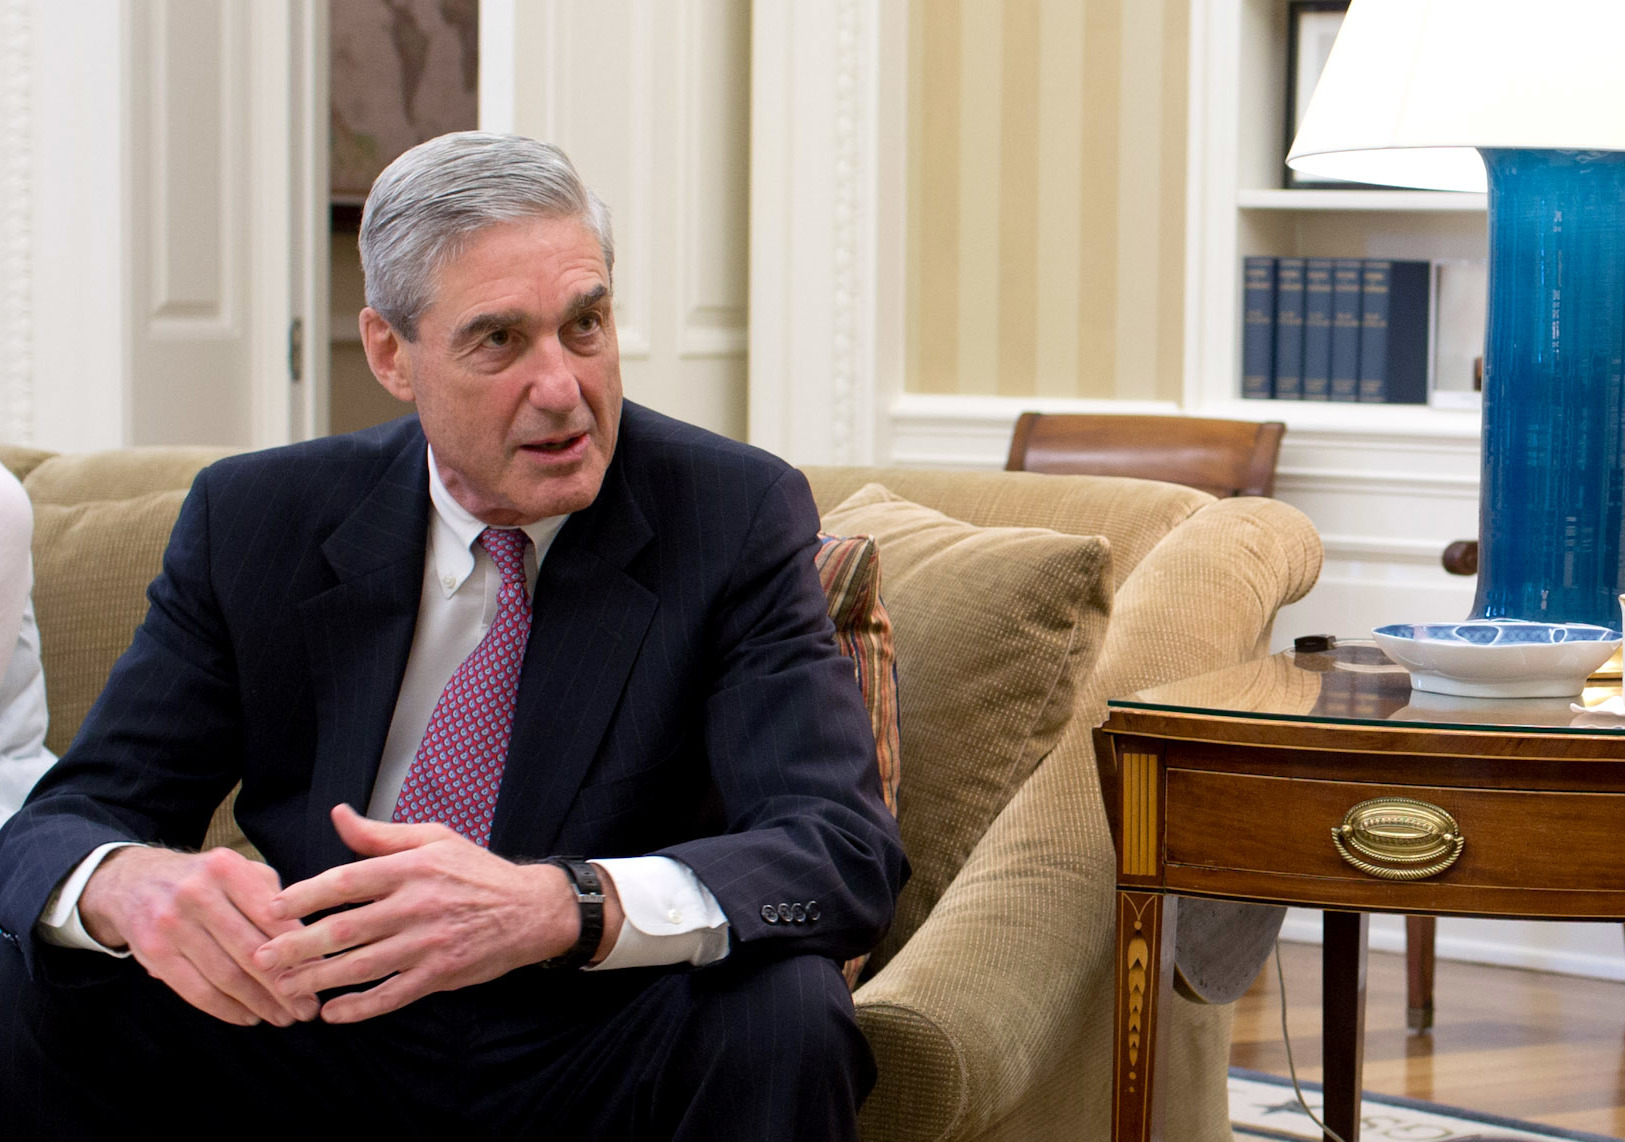 UPDATE 2-Trump's U.S. Justice Department to release some Mueller evidence to Congress -Nadler